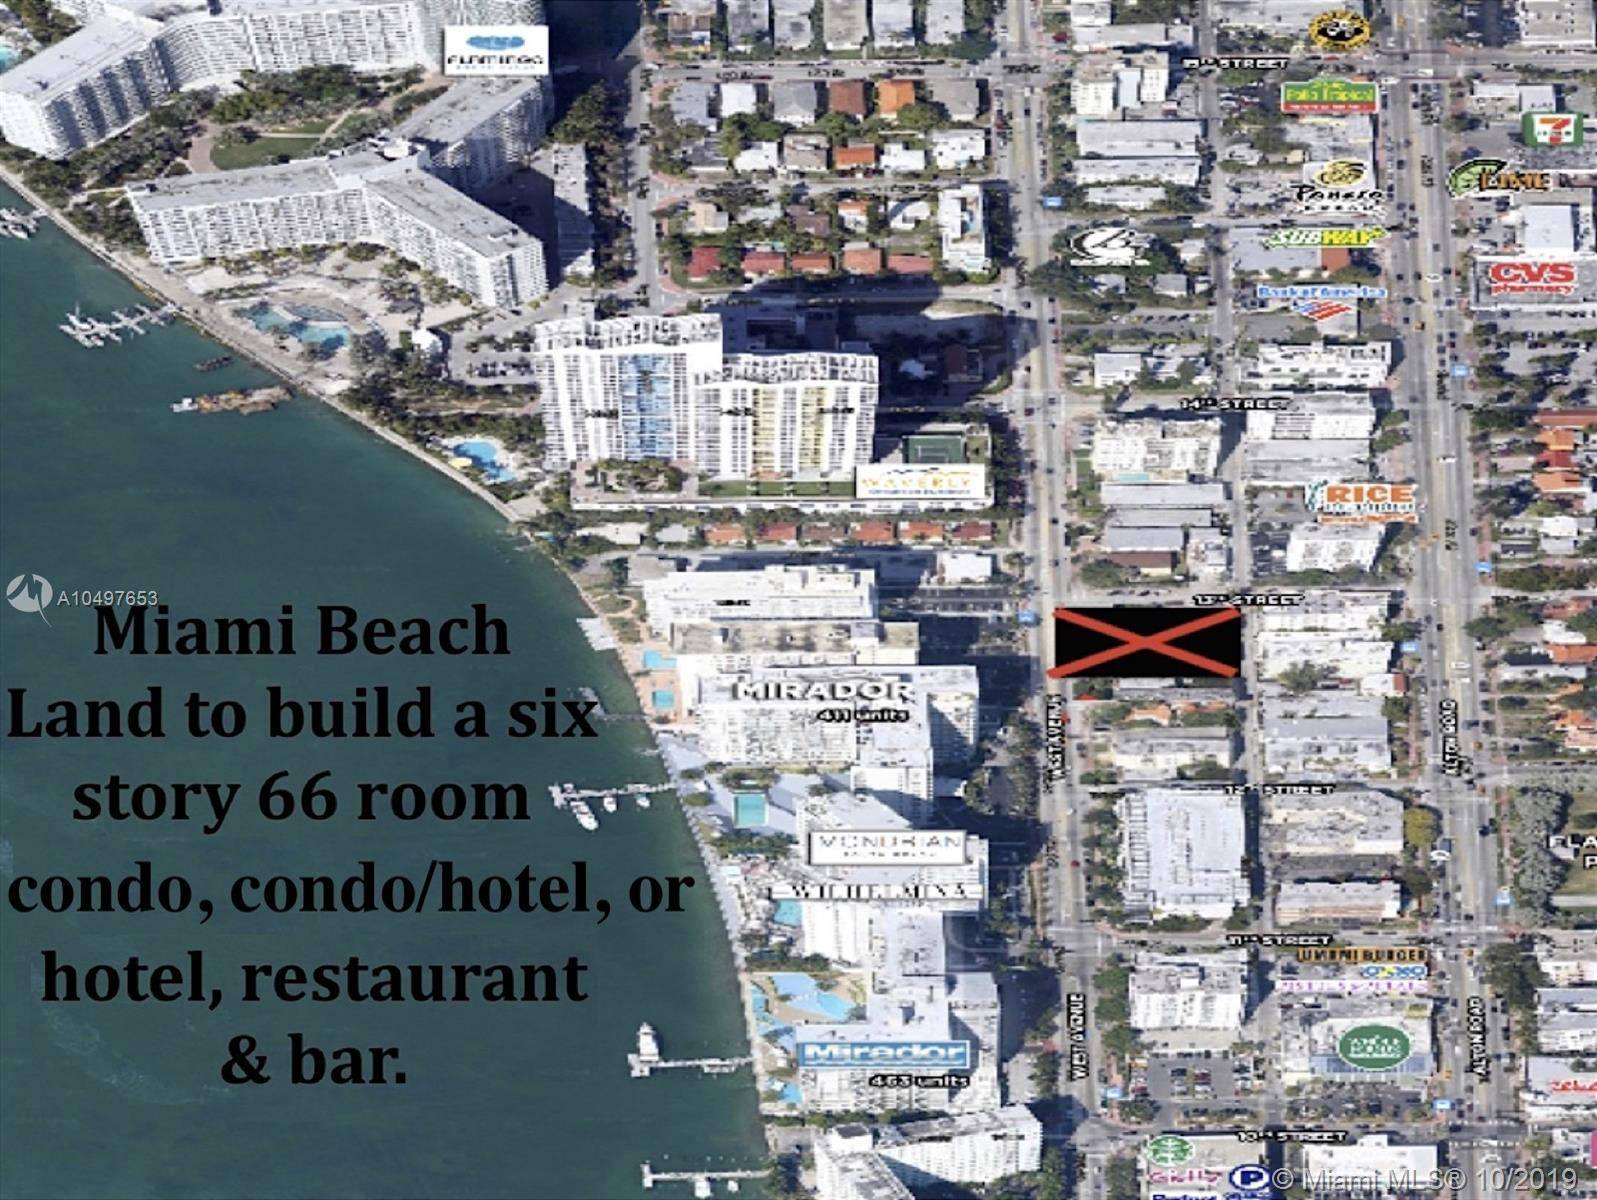 BUILD 34, 500 SQ. FT. OR POSSIBLY MORE WITH FLORIDA LIVE LOCAL ACT OF A CONDO, HOTEL, CONDO HOTEL, OR HOSTEL.